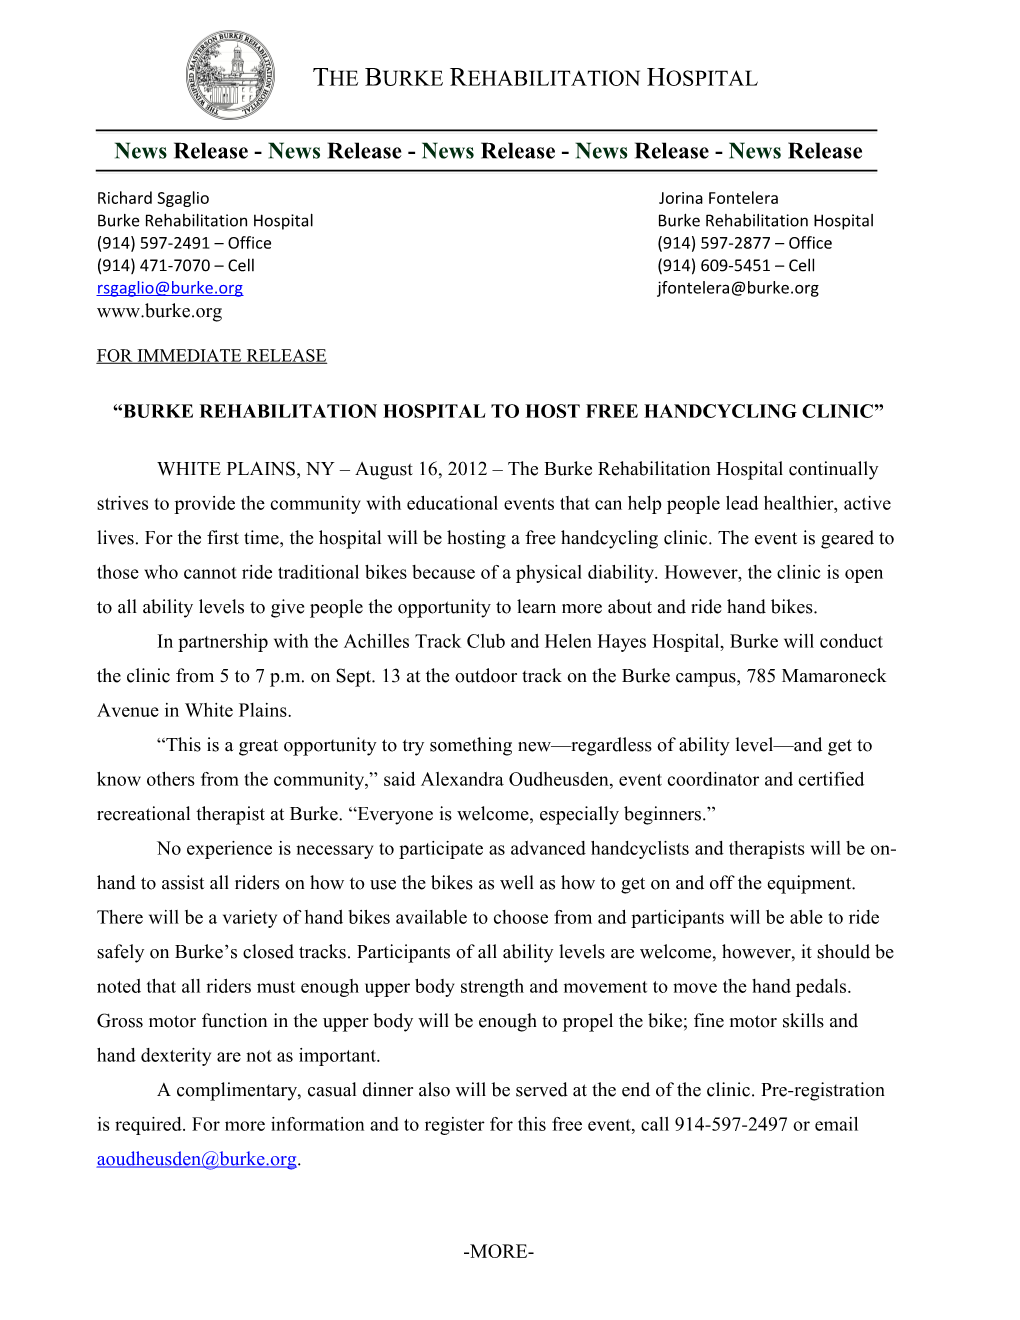 News Release - News Release - News Release - News Release - News Release